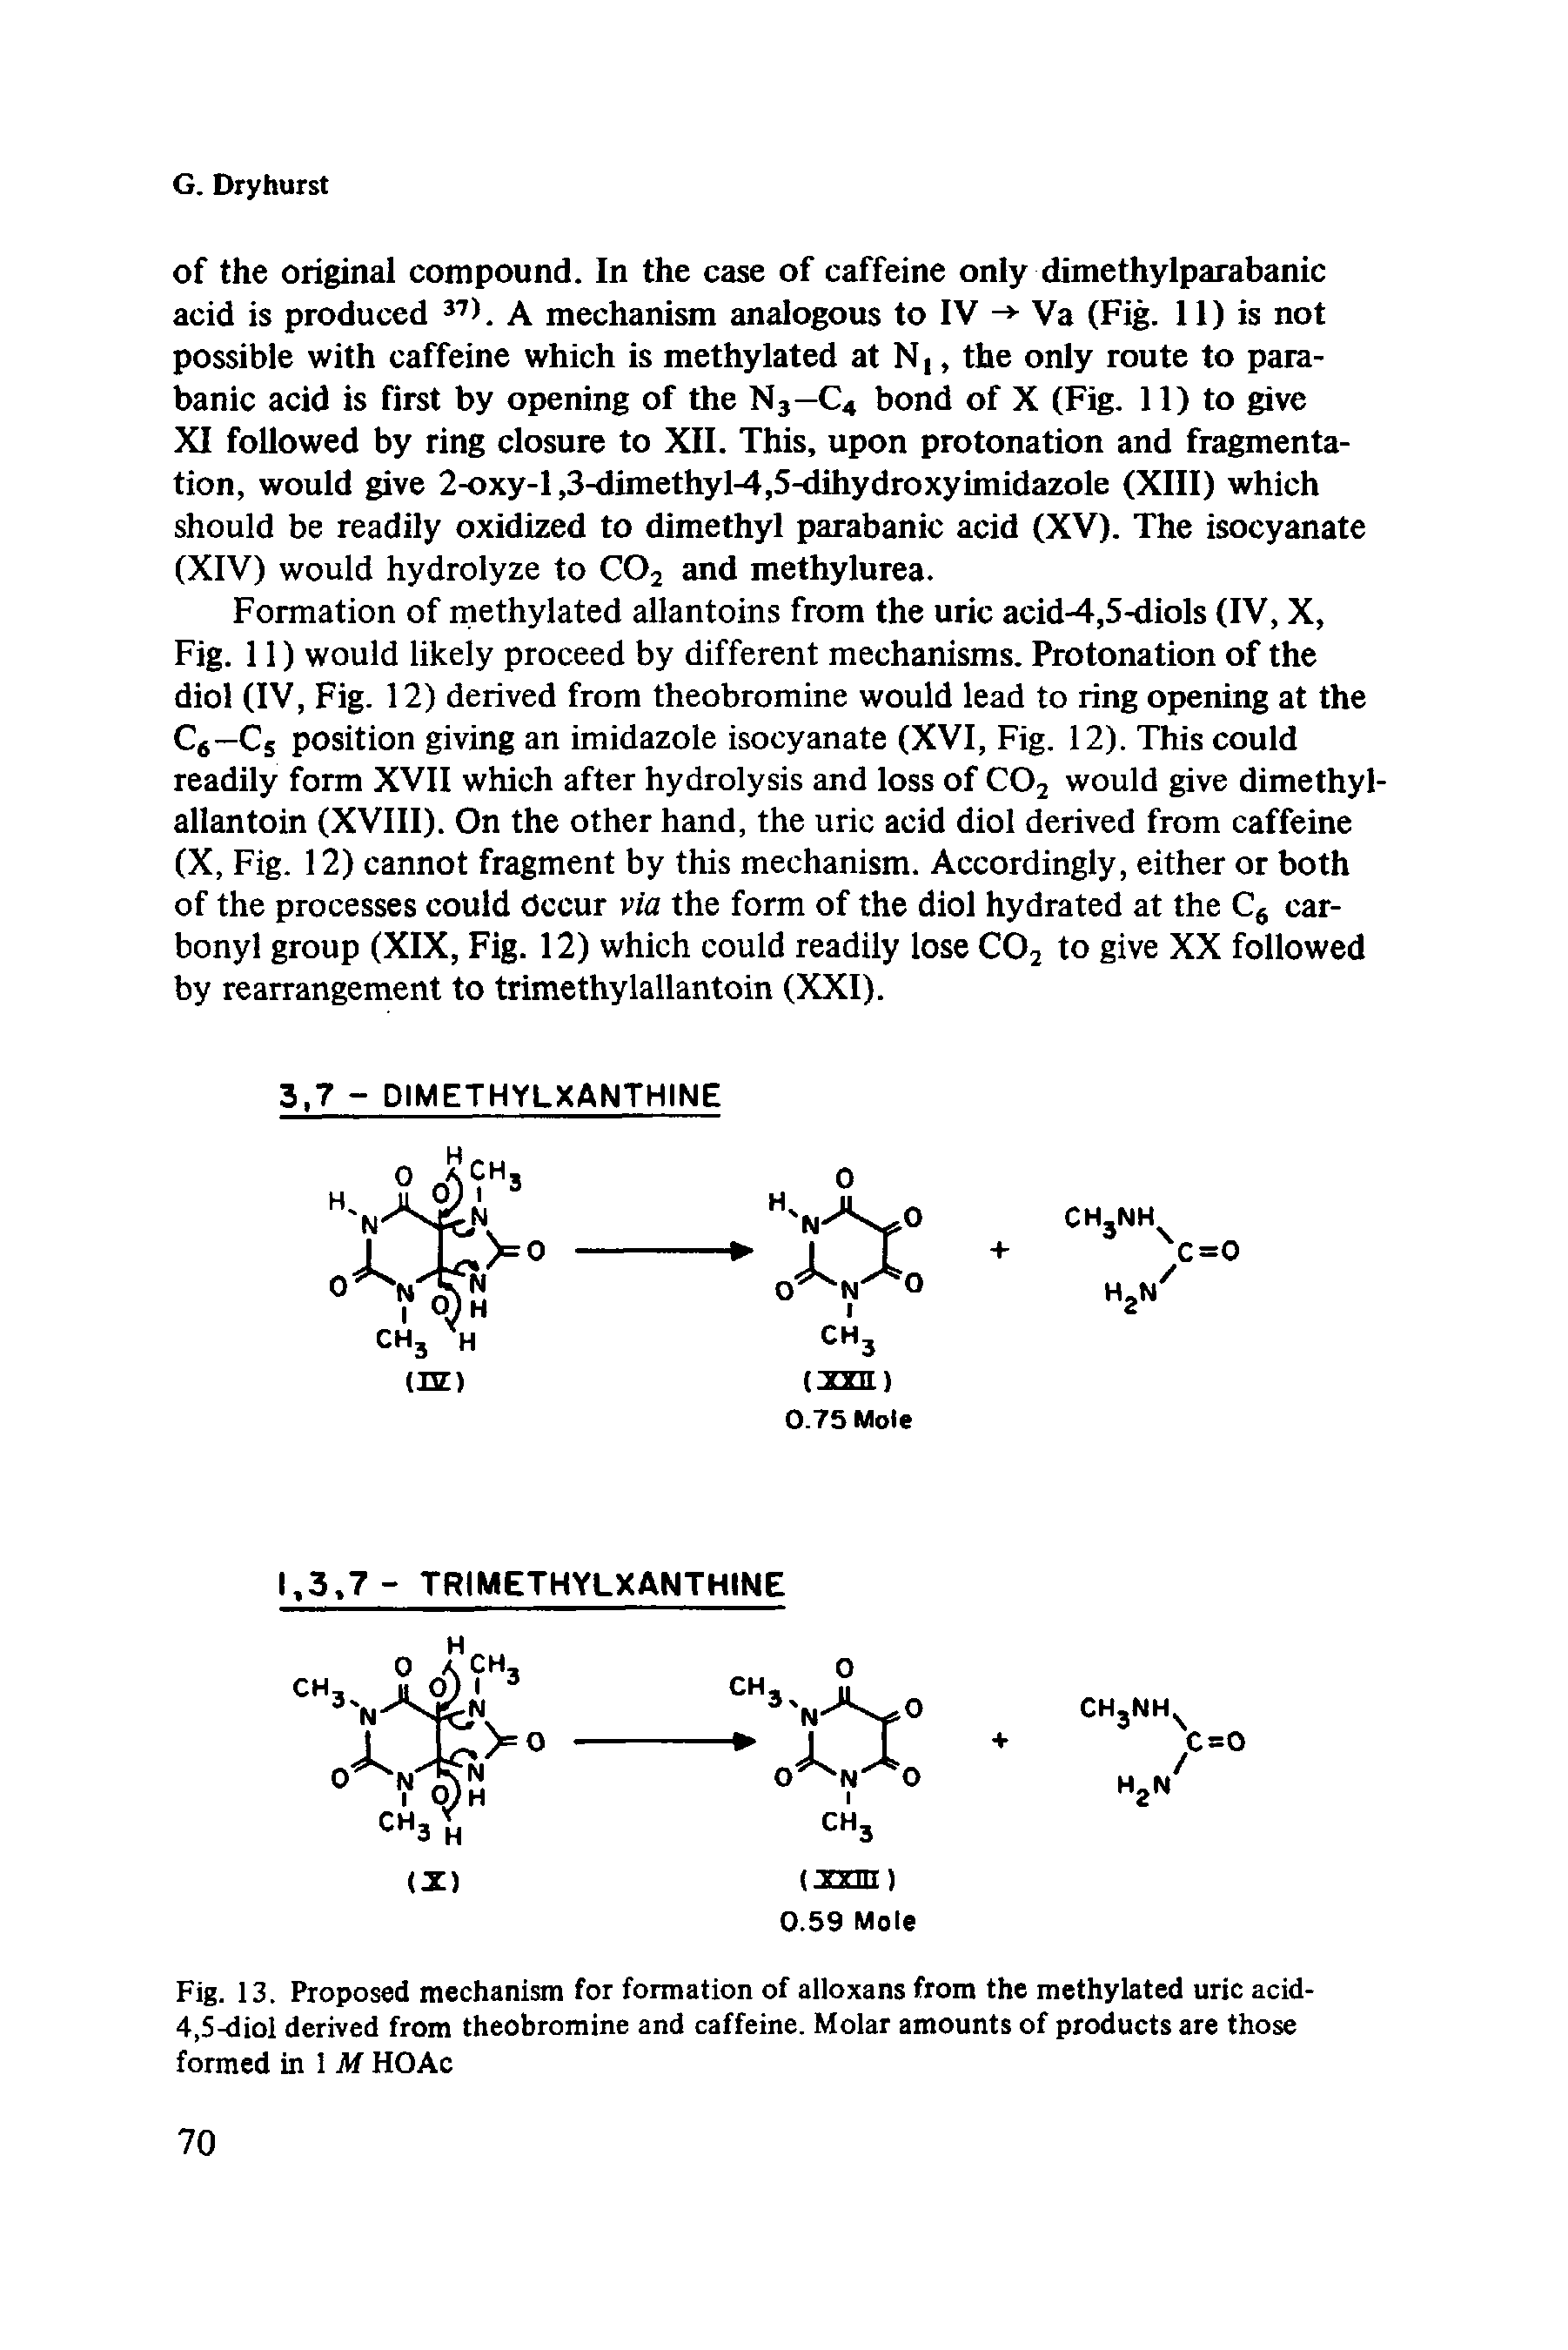 Fig. 13. Proposed mechanism for formation of alloxans from the methylated uric acid-4,5-diol derived from theobromine and caffeine. Molar amounts of products are those formed in 1 M HOAc...